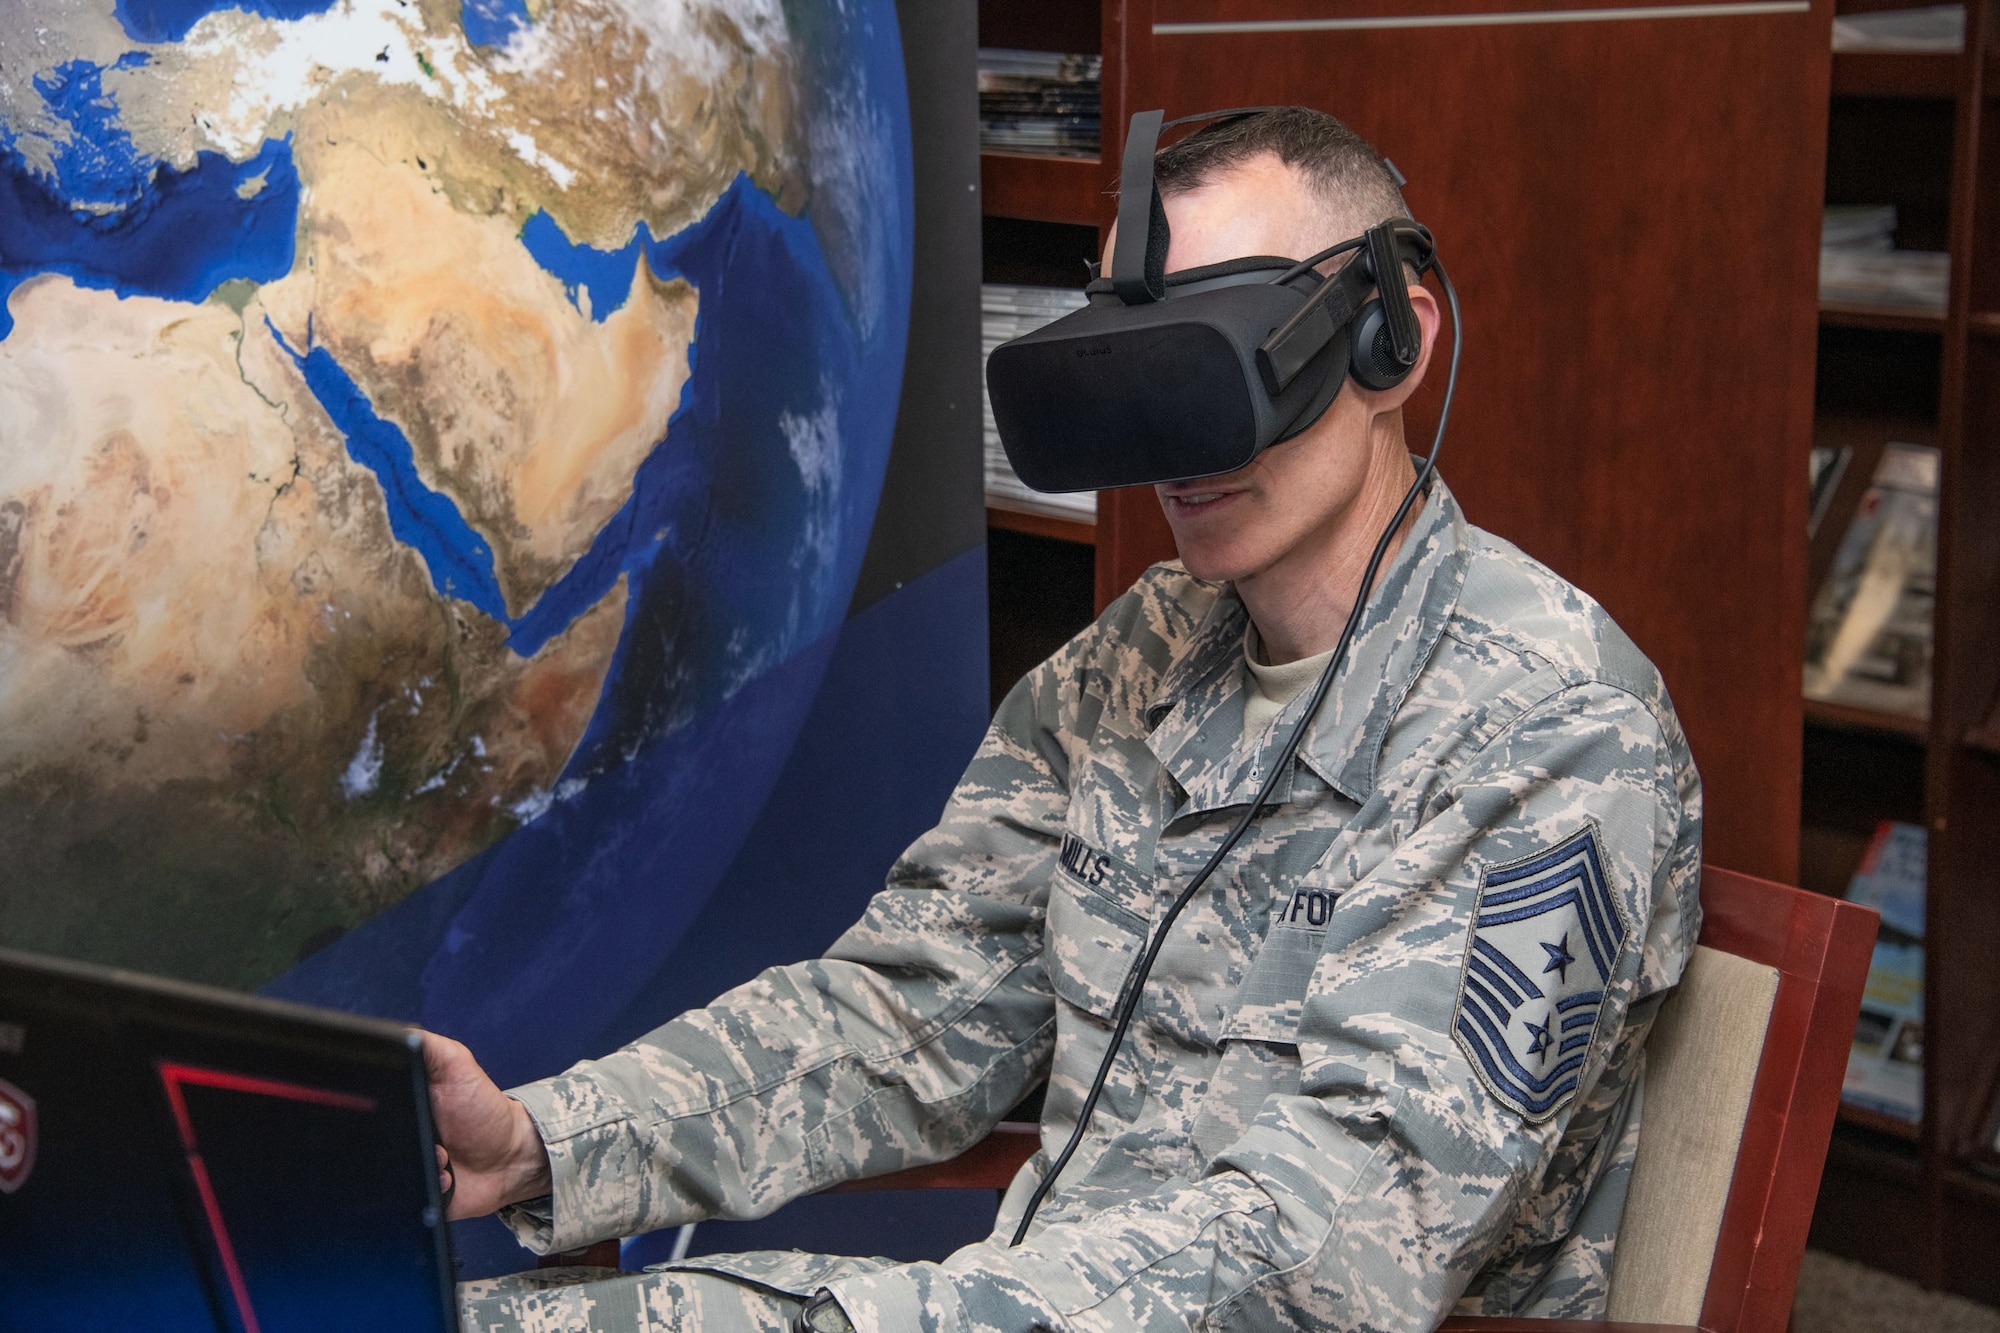 Chief Master Sgt. Lee Mills, 673rd Air Base Wing command chief from Joint Base Elmendorf-Richardson, Alaska, tests out virtual reality Aug. 13, 2019, during the Air University wing commander’s orientation on Maxwell Air Force Base, Alabama. Just one of the many projects the attendees had the opportunity to learn about was Air University’s application of virtual and mixed-reality as a means of enhancing the training of Airmen.